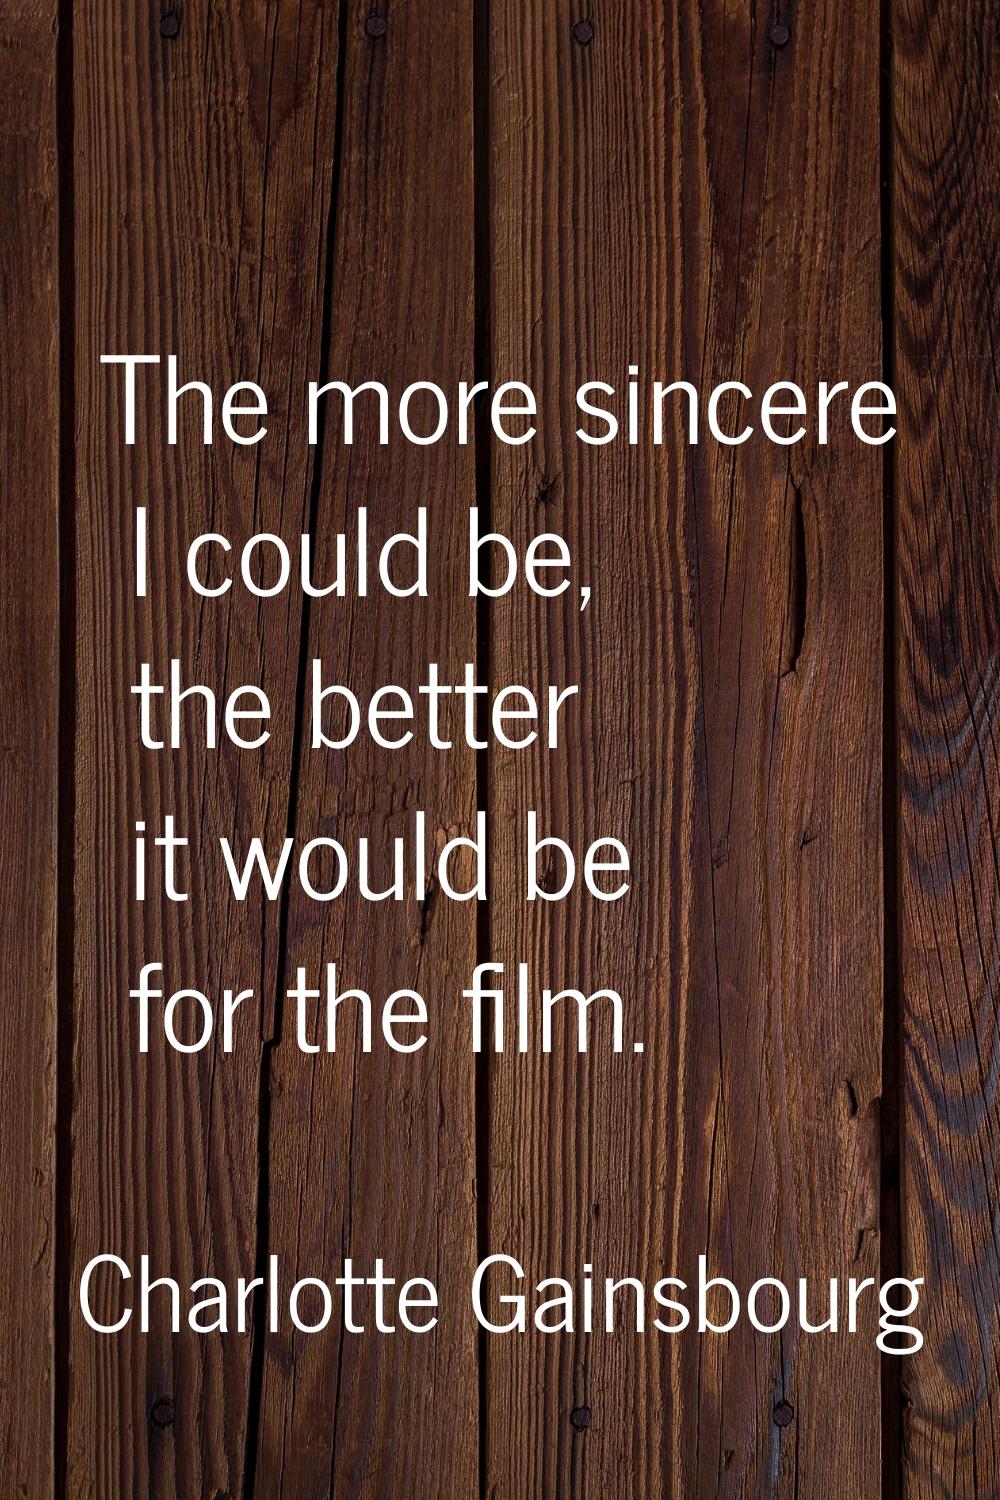 The more sincere I could be, the better it would be for the film.